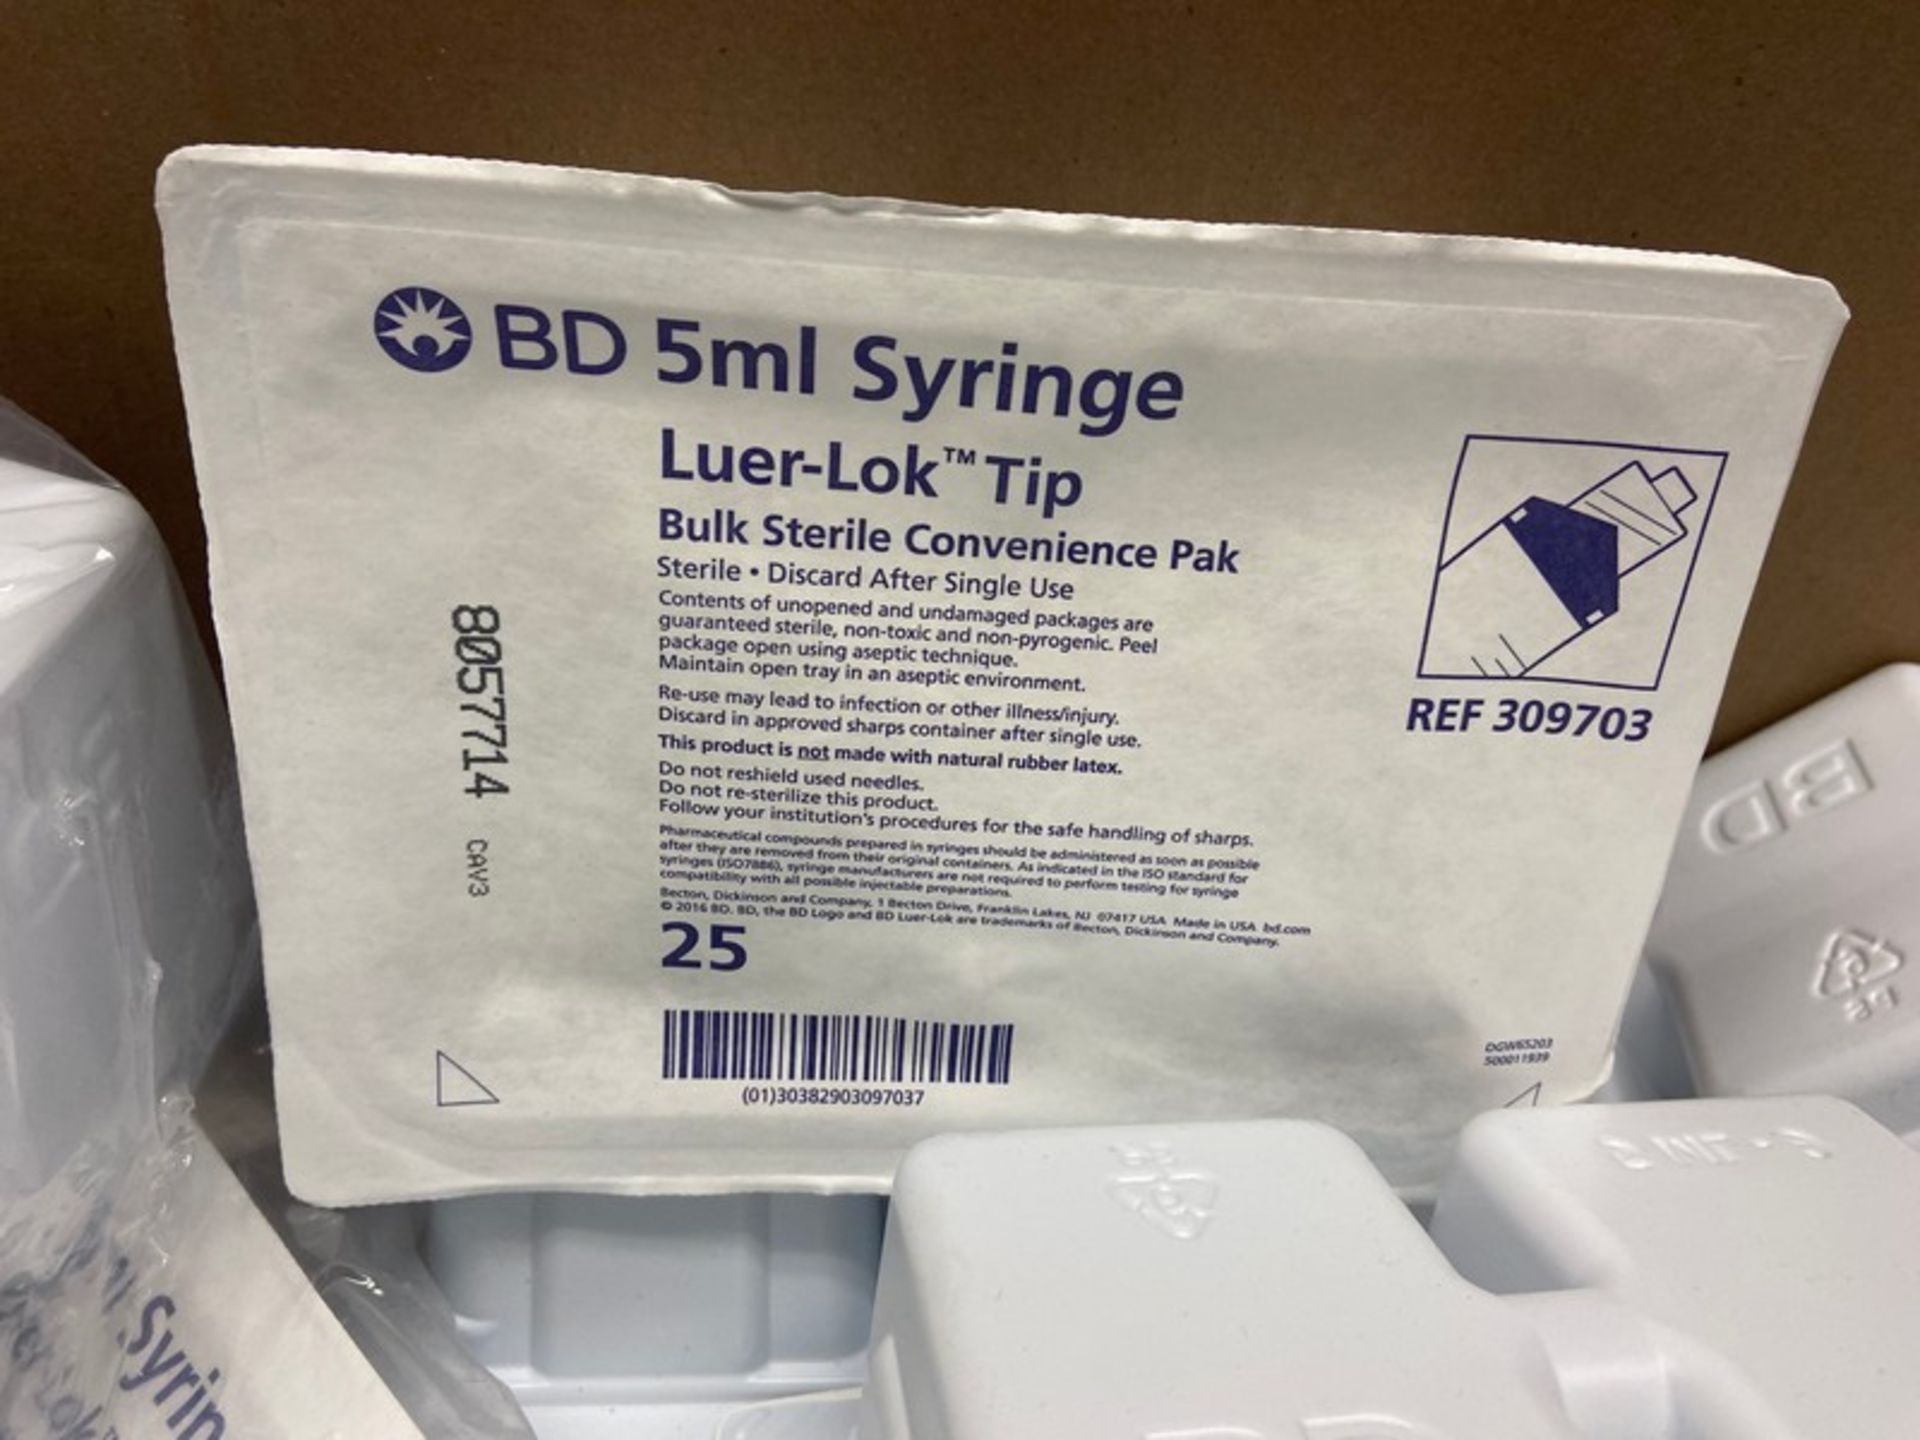 Lot of Assorted NEW BD 5ml Syringe Luer-Lok Tip Bulk Sterile Conveince Pak (LOCATED IN MIDDLETOWN,-